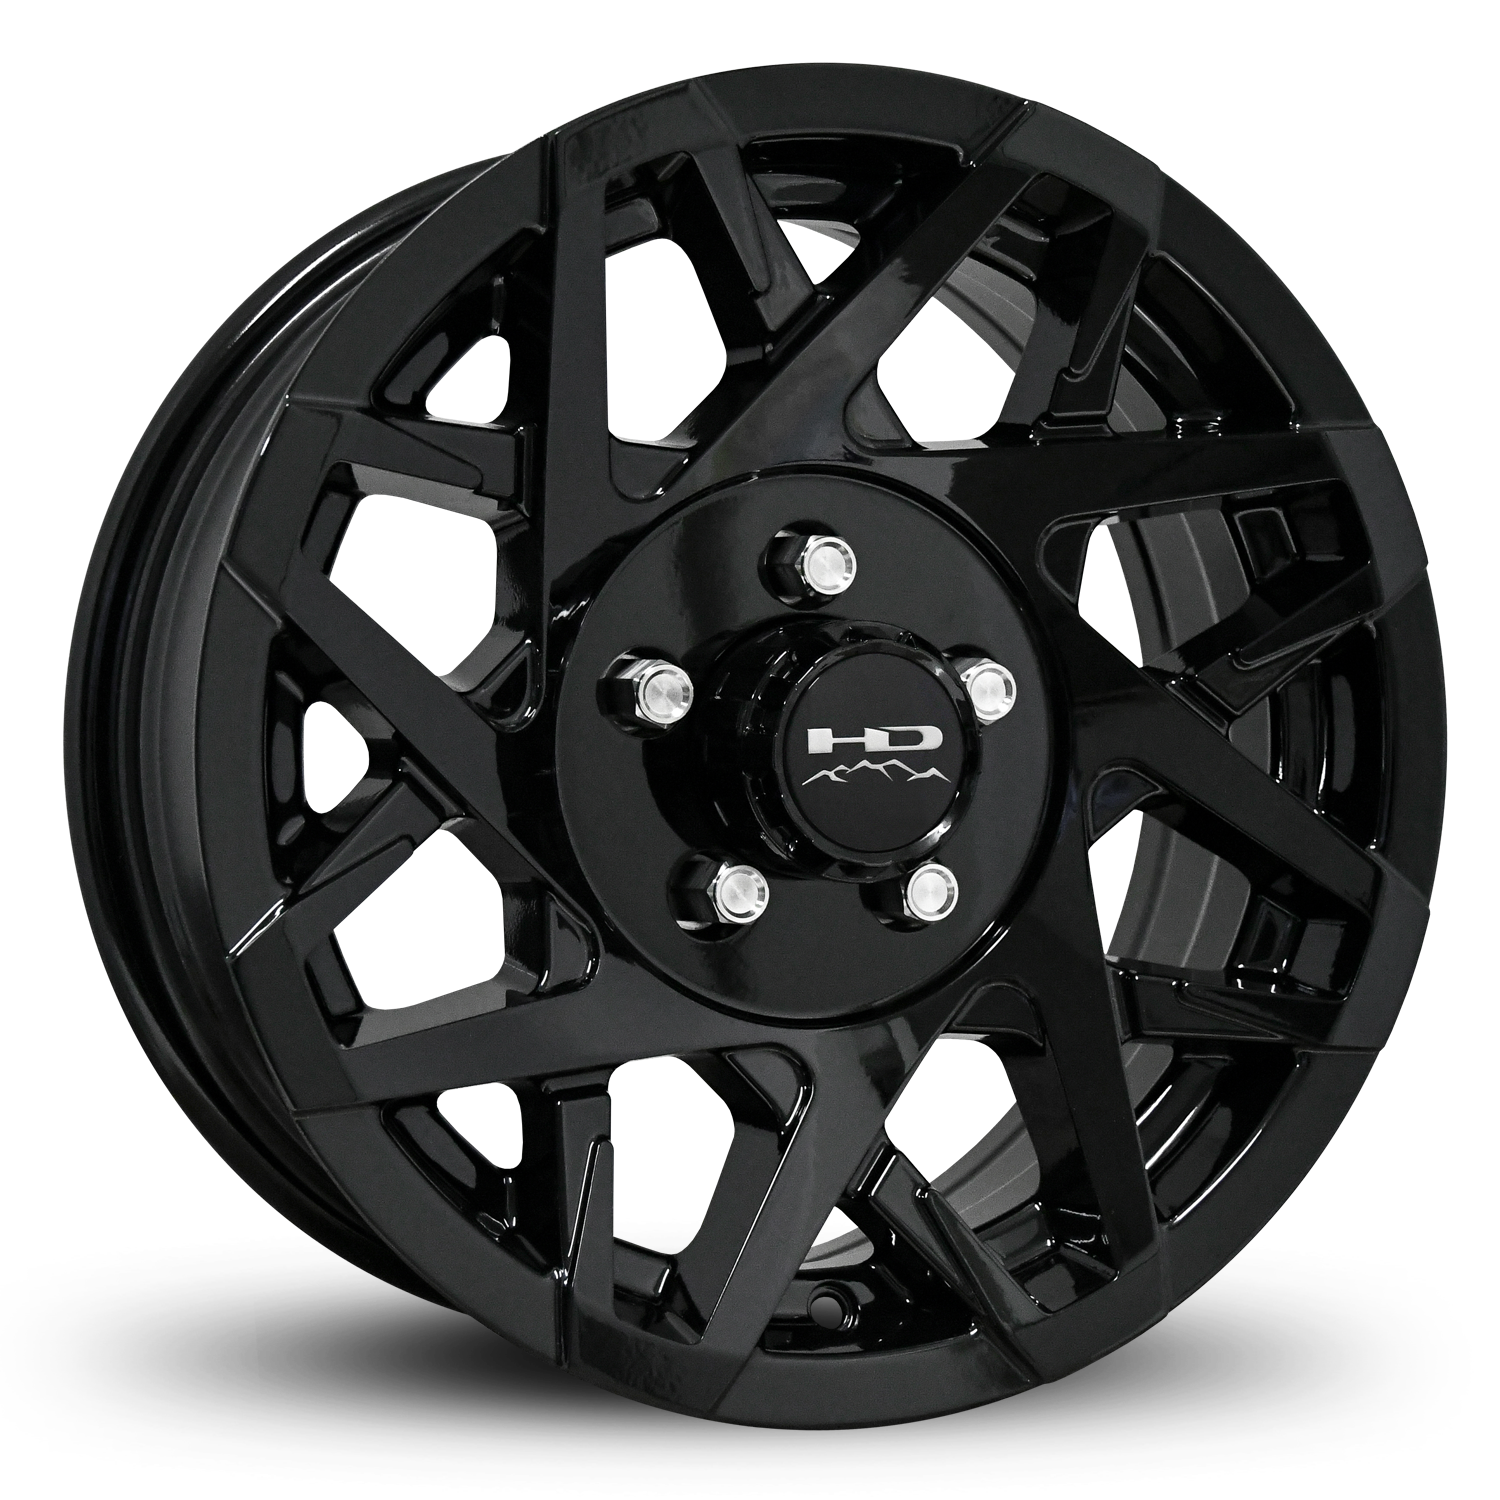 HD Off-Road Canyon Custom Trailer Wheel Rims in 15x6.0  15x6 All Gloss Black with Center Cap & Logo fits 5x4.50 / 5x114.3 Axle Boat, Car, RV, Travel, Concession, Horse, Utility, Lawn & Garden, & Landscaping.